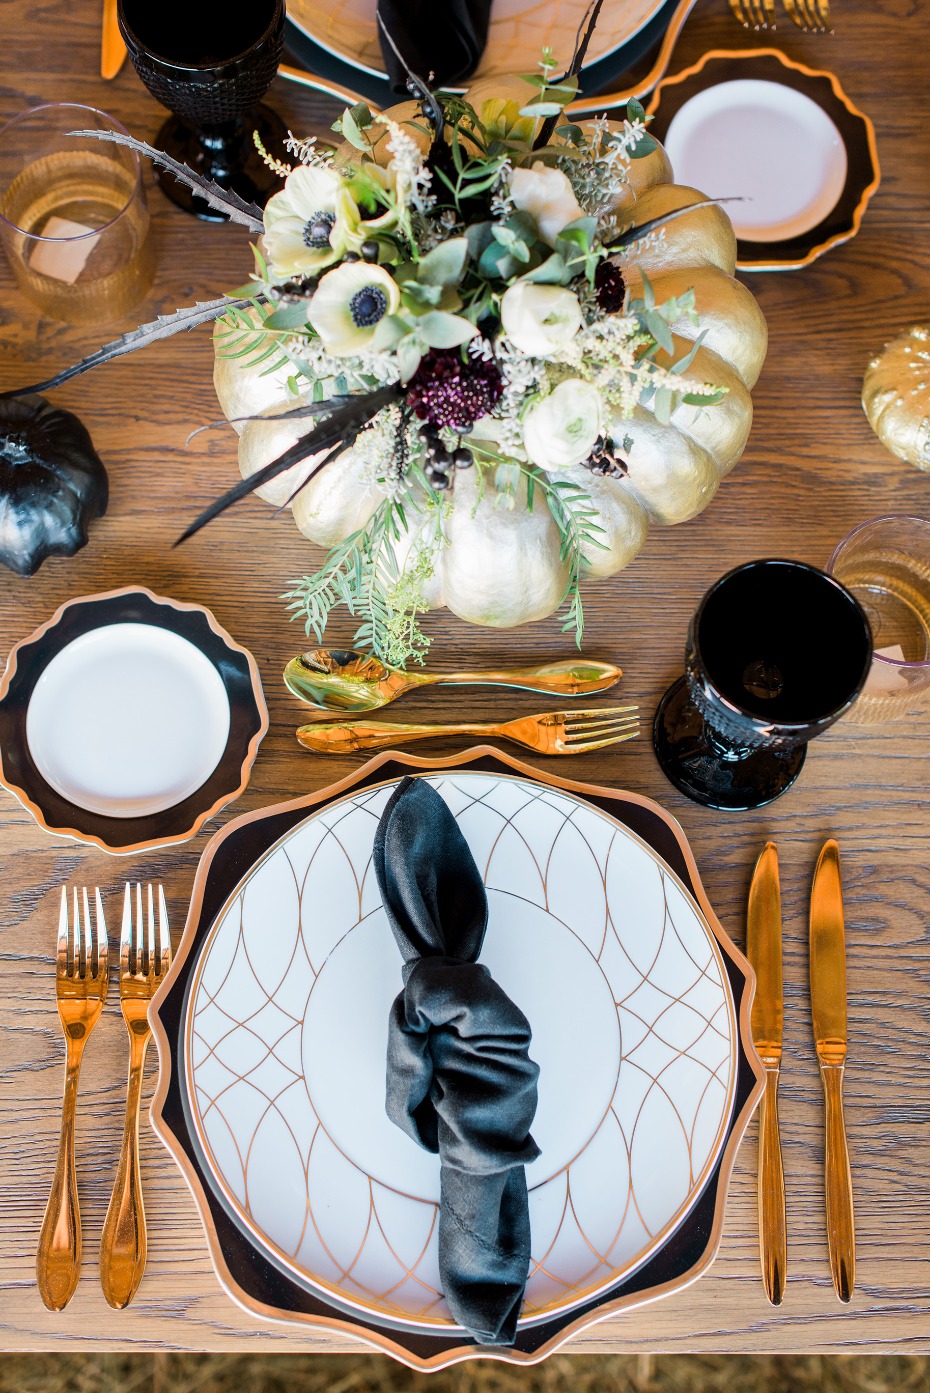 Modern farm table decor in gold, black, and white